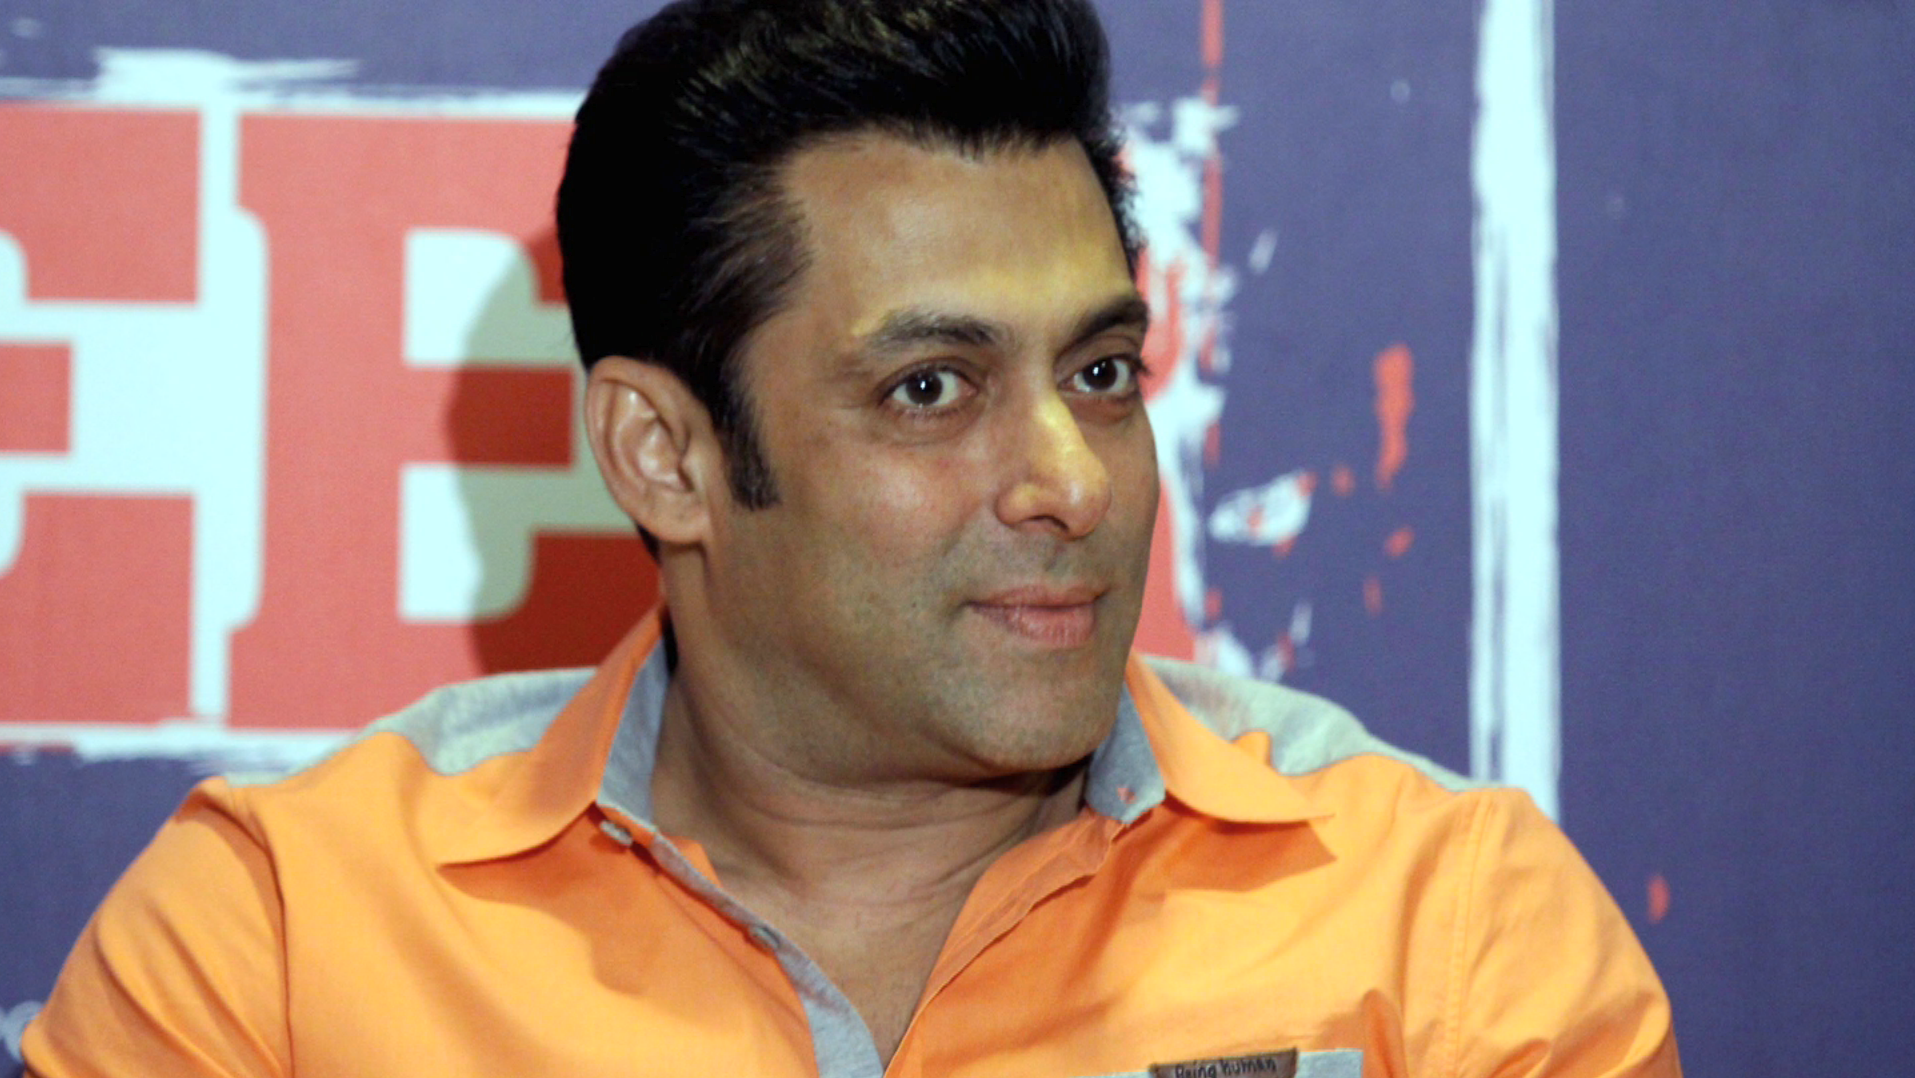 Salman Khan's conviction in fatal hit-and-run tossed | CNN